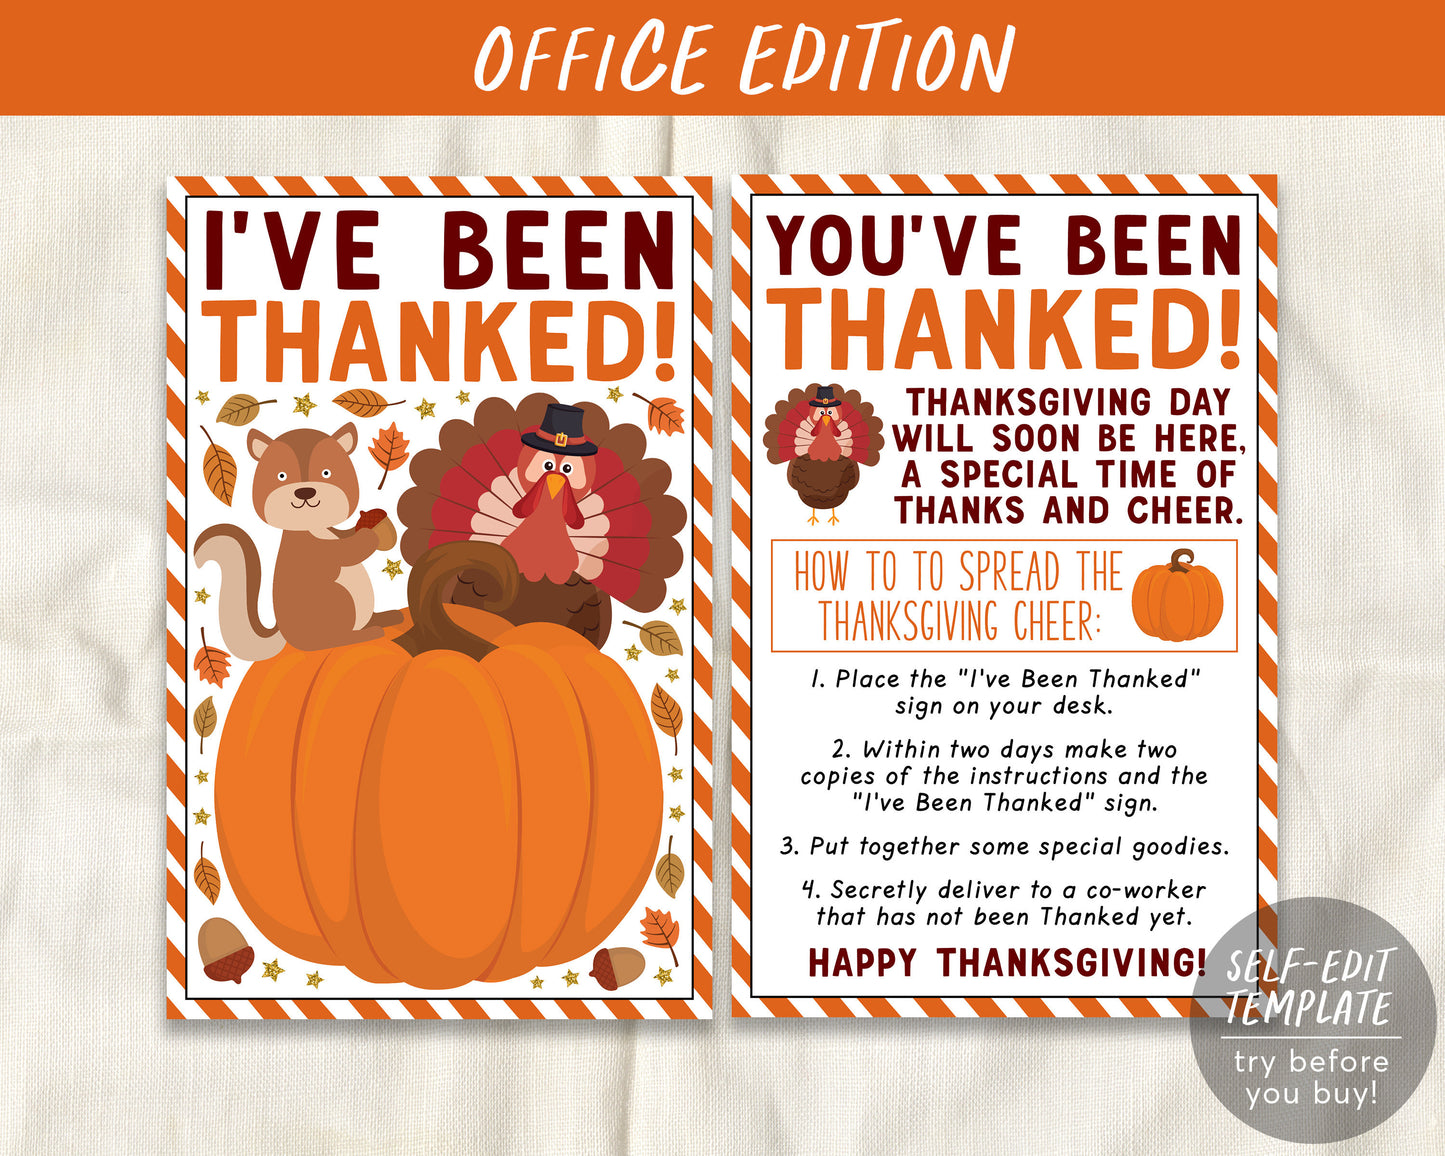 I've Been Thanked Coworker Game Editable Template, You've Been Thanked, Thanksgiving Thank'd Office Party Game, Activity Sign Instructions